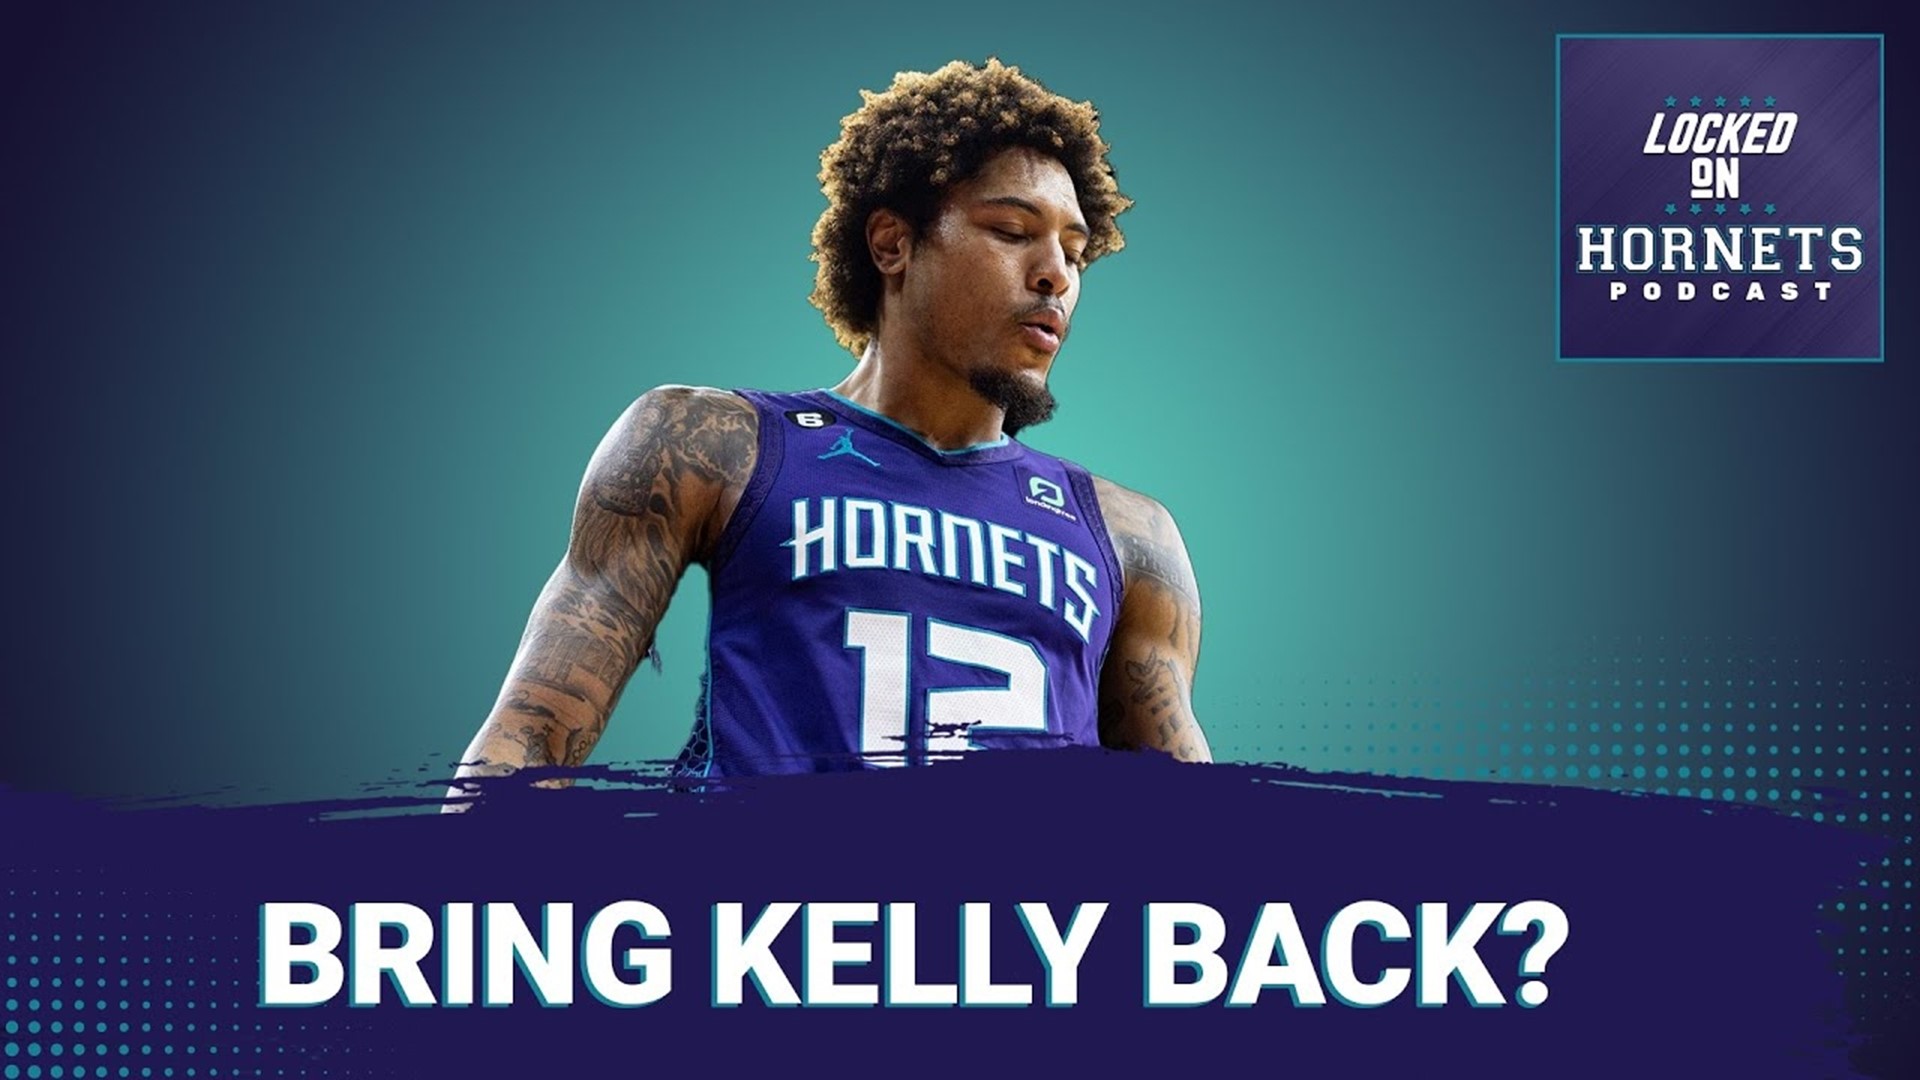 The Charlotte Hornets only have 11 games left to go in the season. What's the journey been like for someone who covers the team?  Nick Carboni of WCNC discusses.